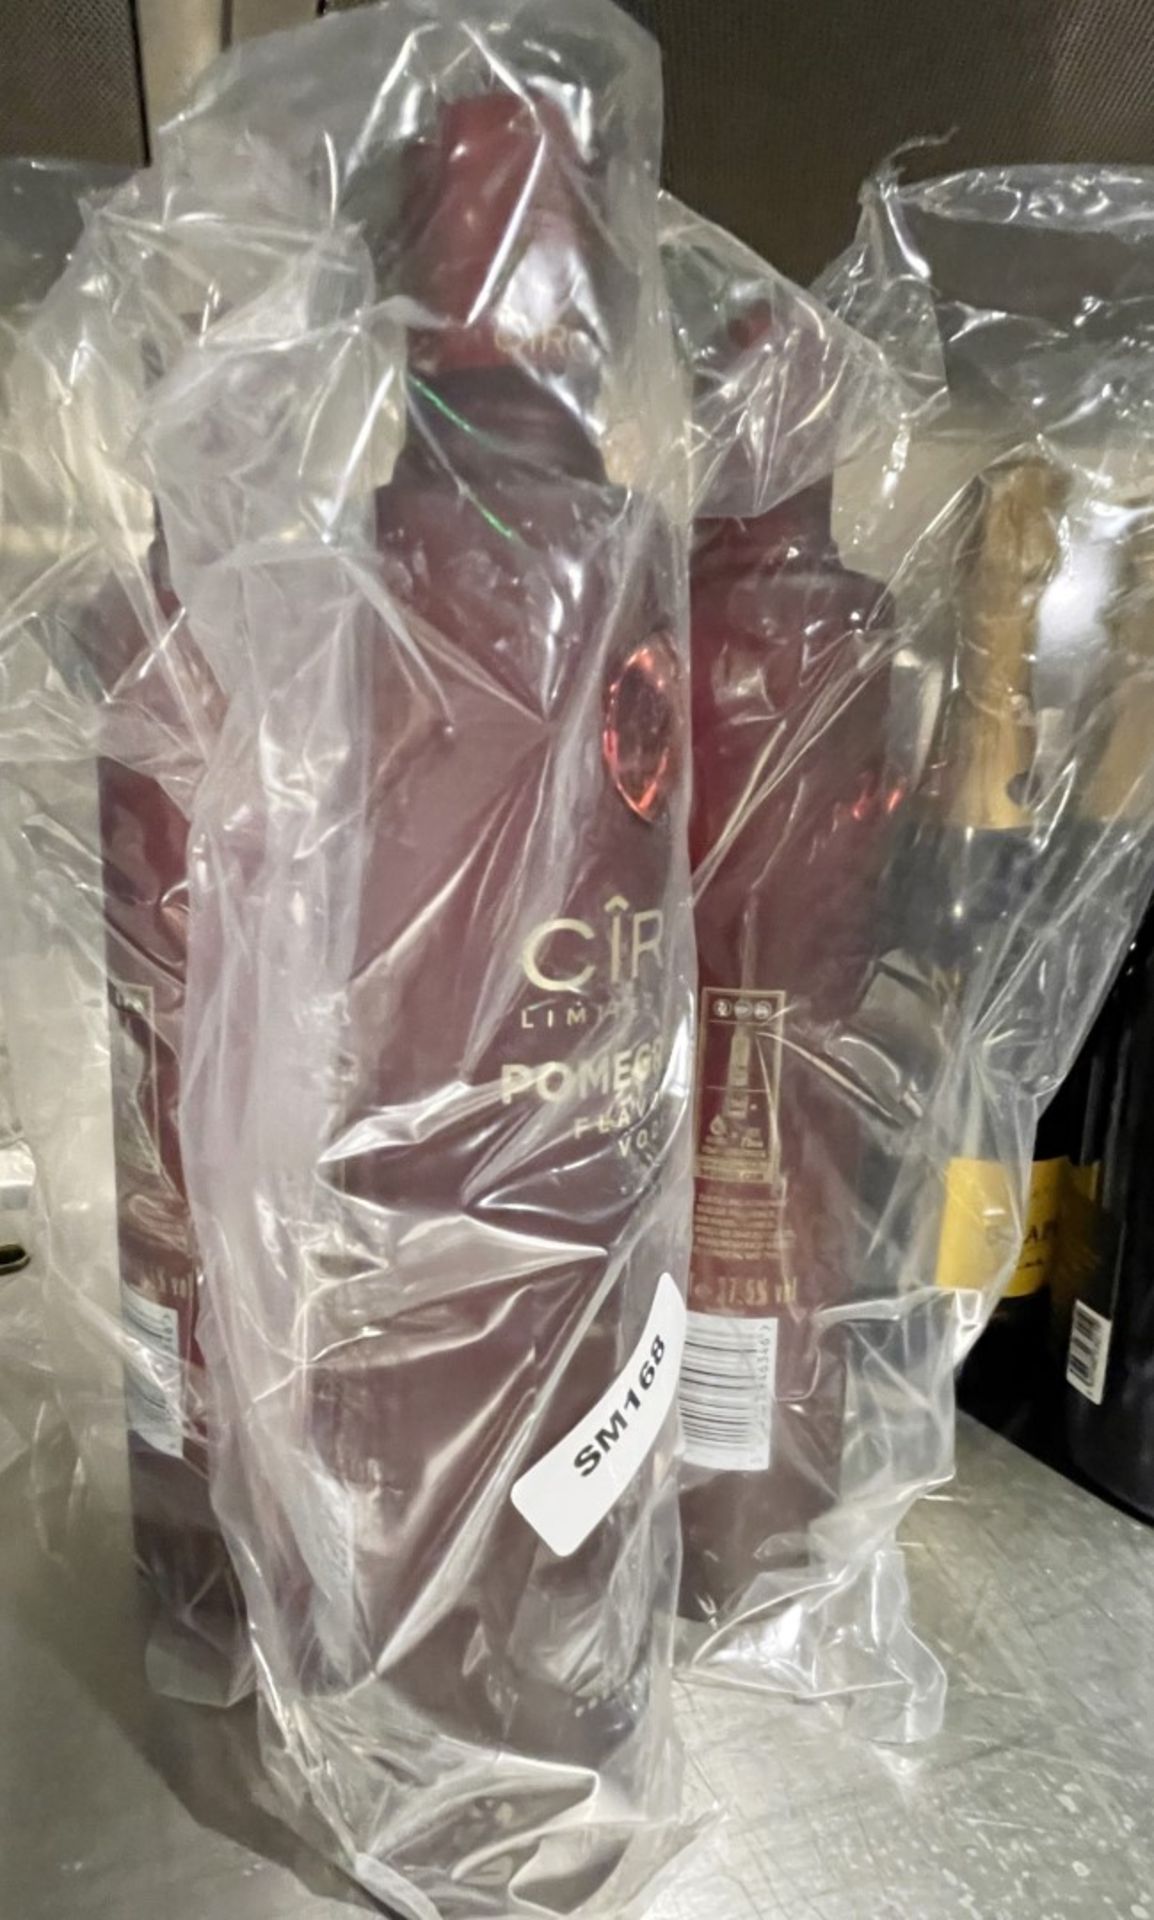 4 x Limited Edition 70cl Bottles of Ciroc Pomegranate Flavoured 37.5% Vodka - New Unopened Bottles - Image 3 of 6